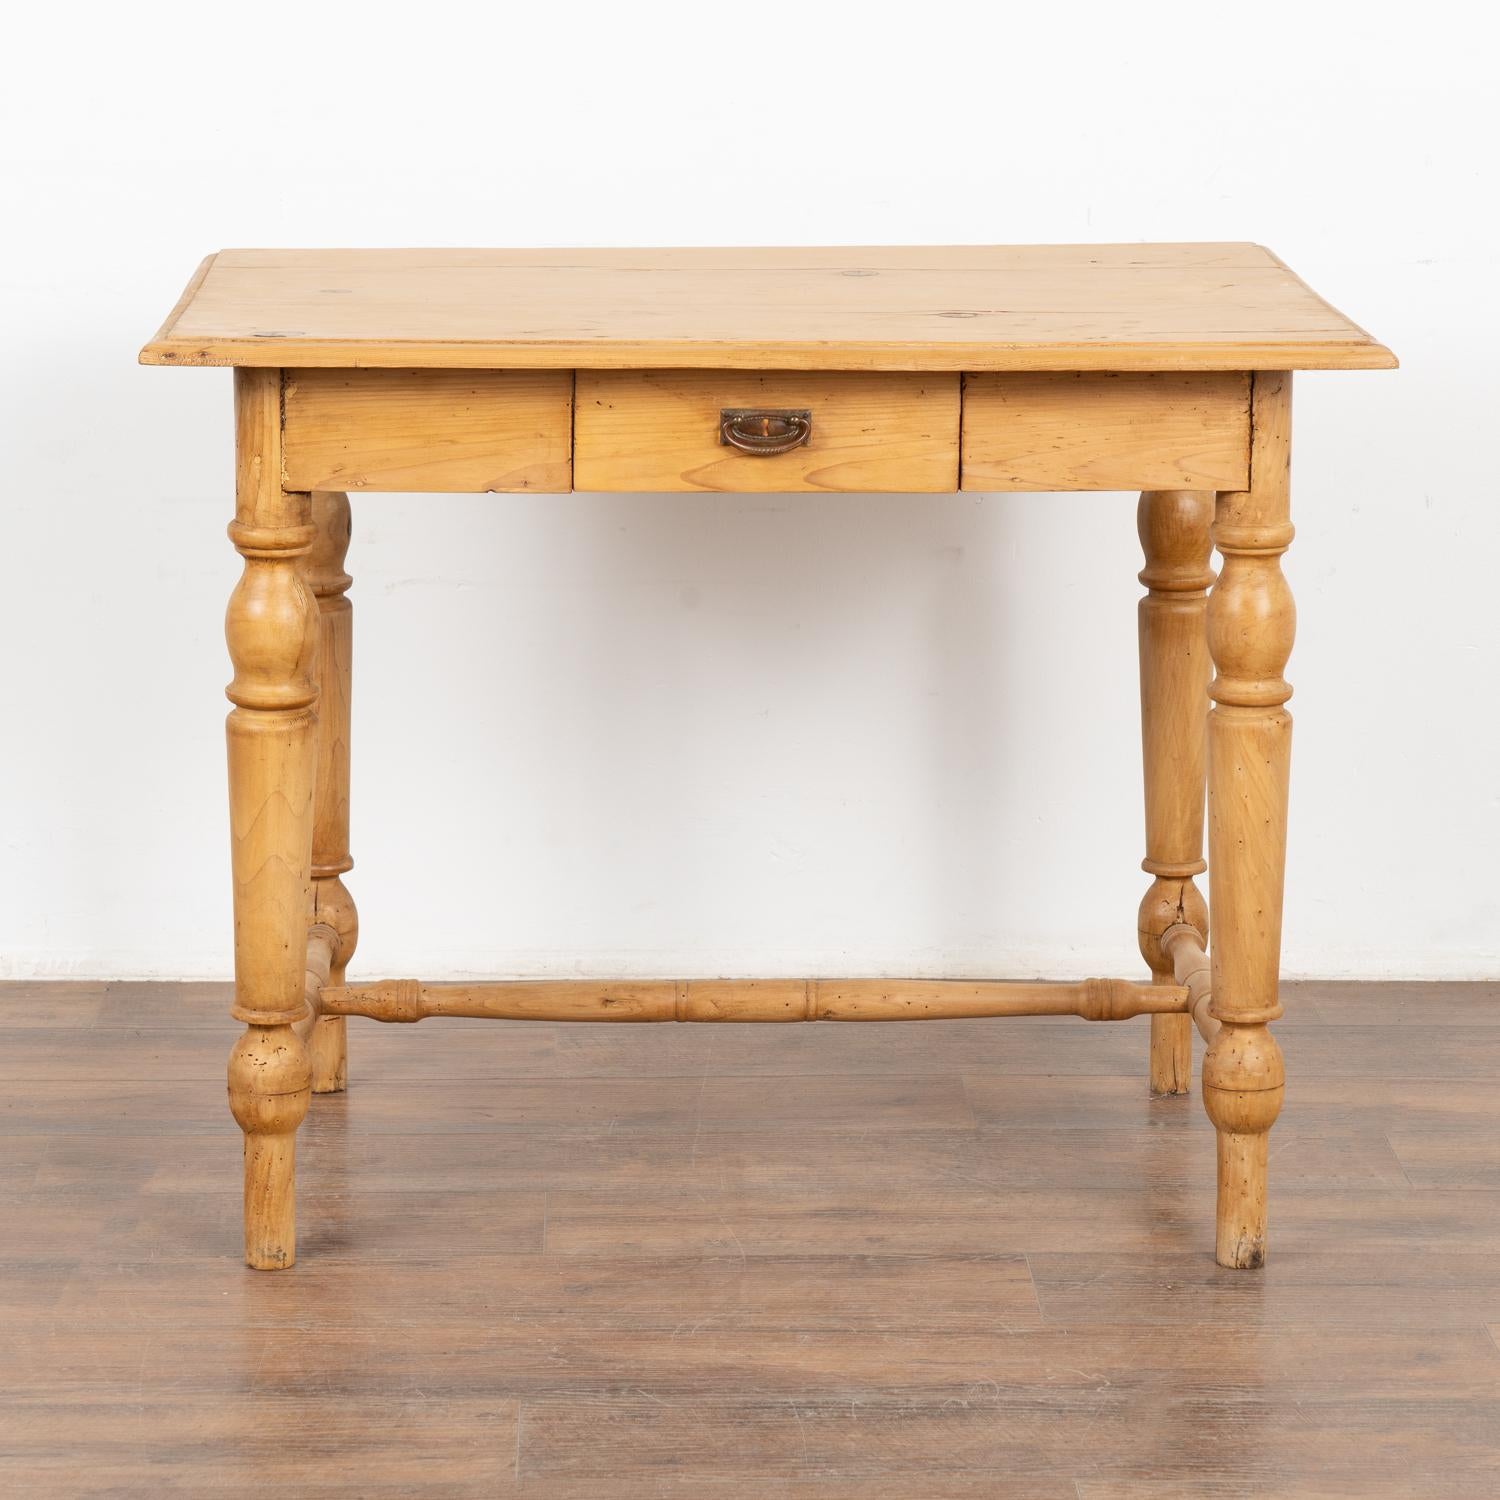 Danish Pine Side Table With Turned Legs and Drawer, Denmark circa 1880-1900 For Sale